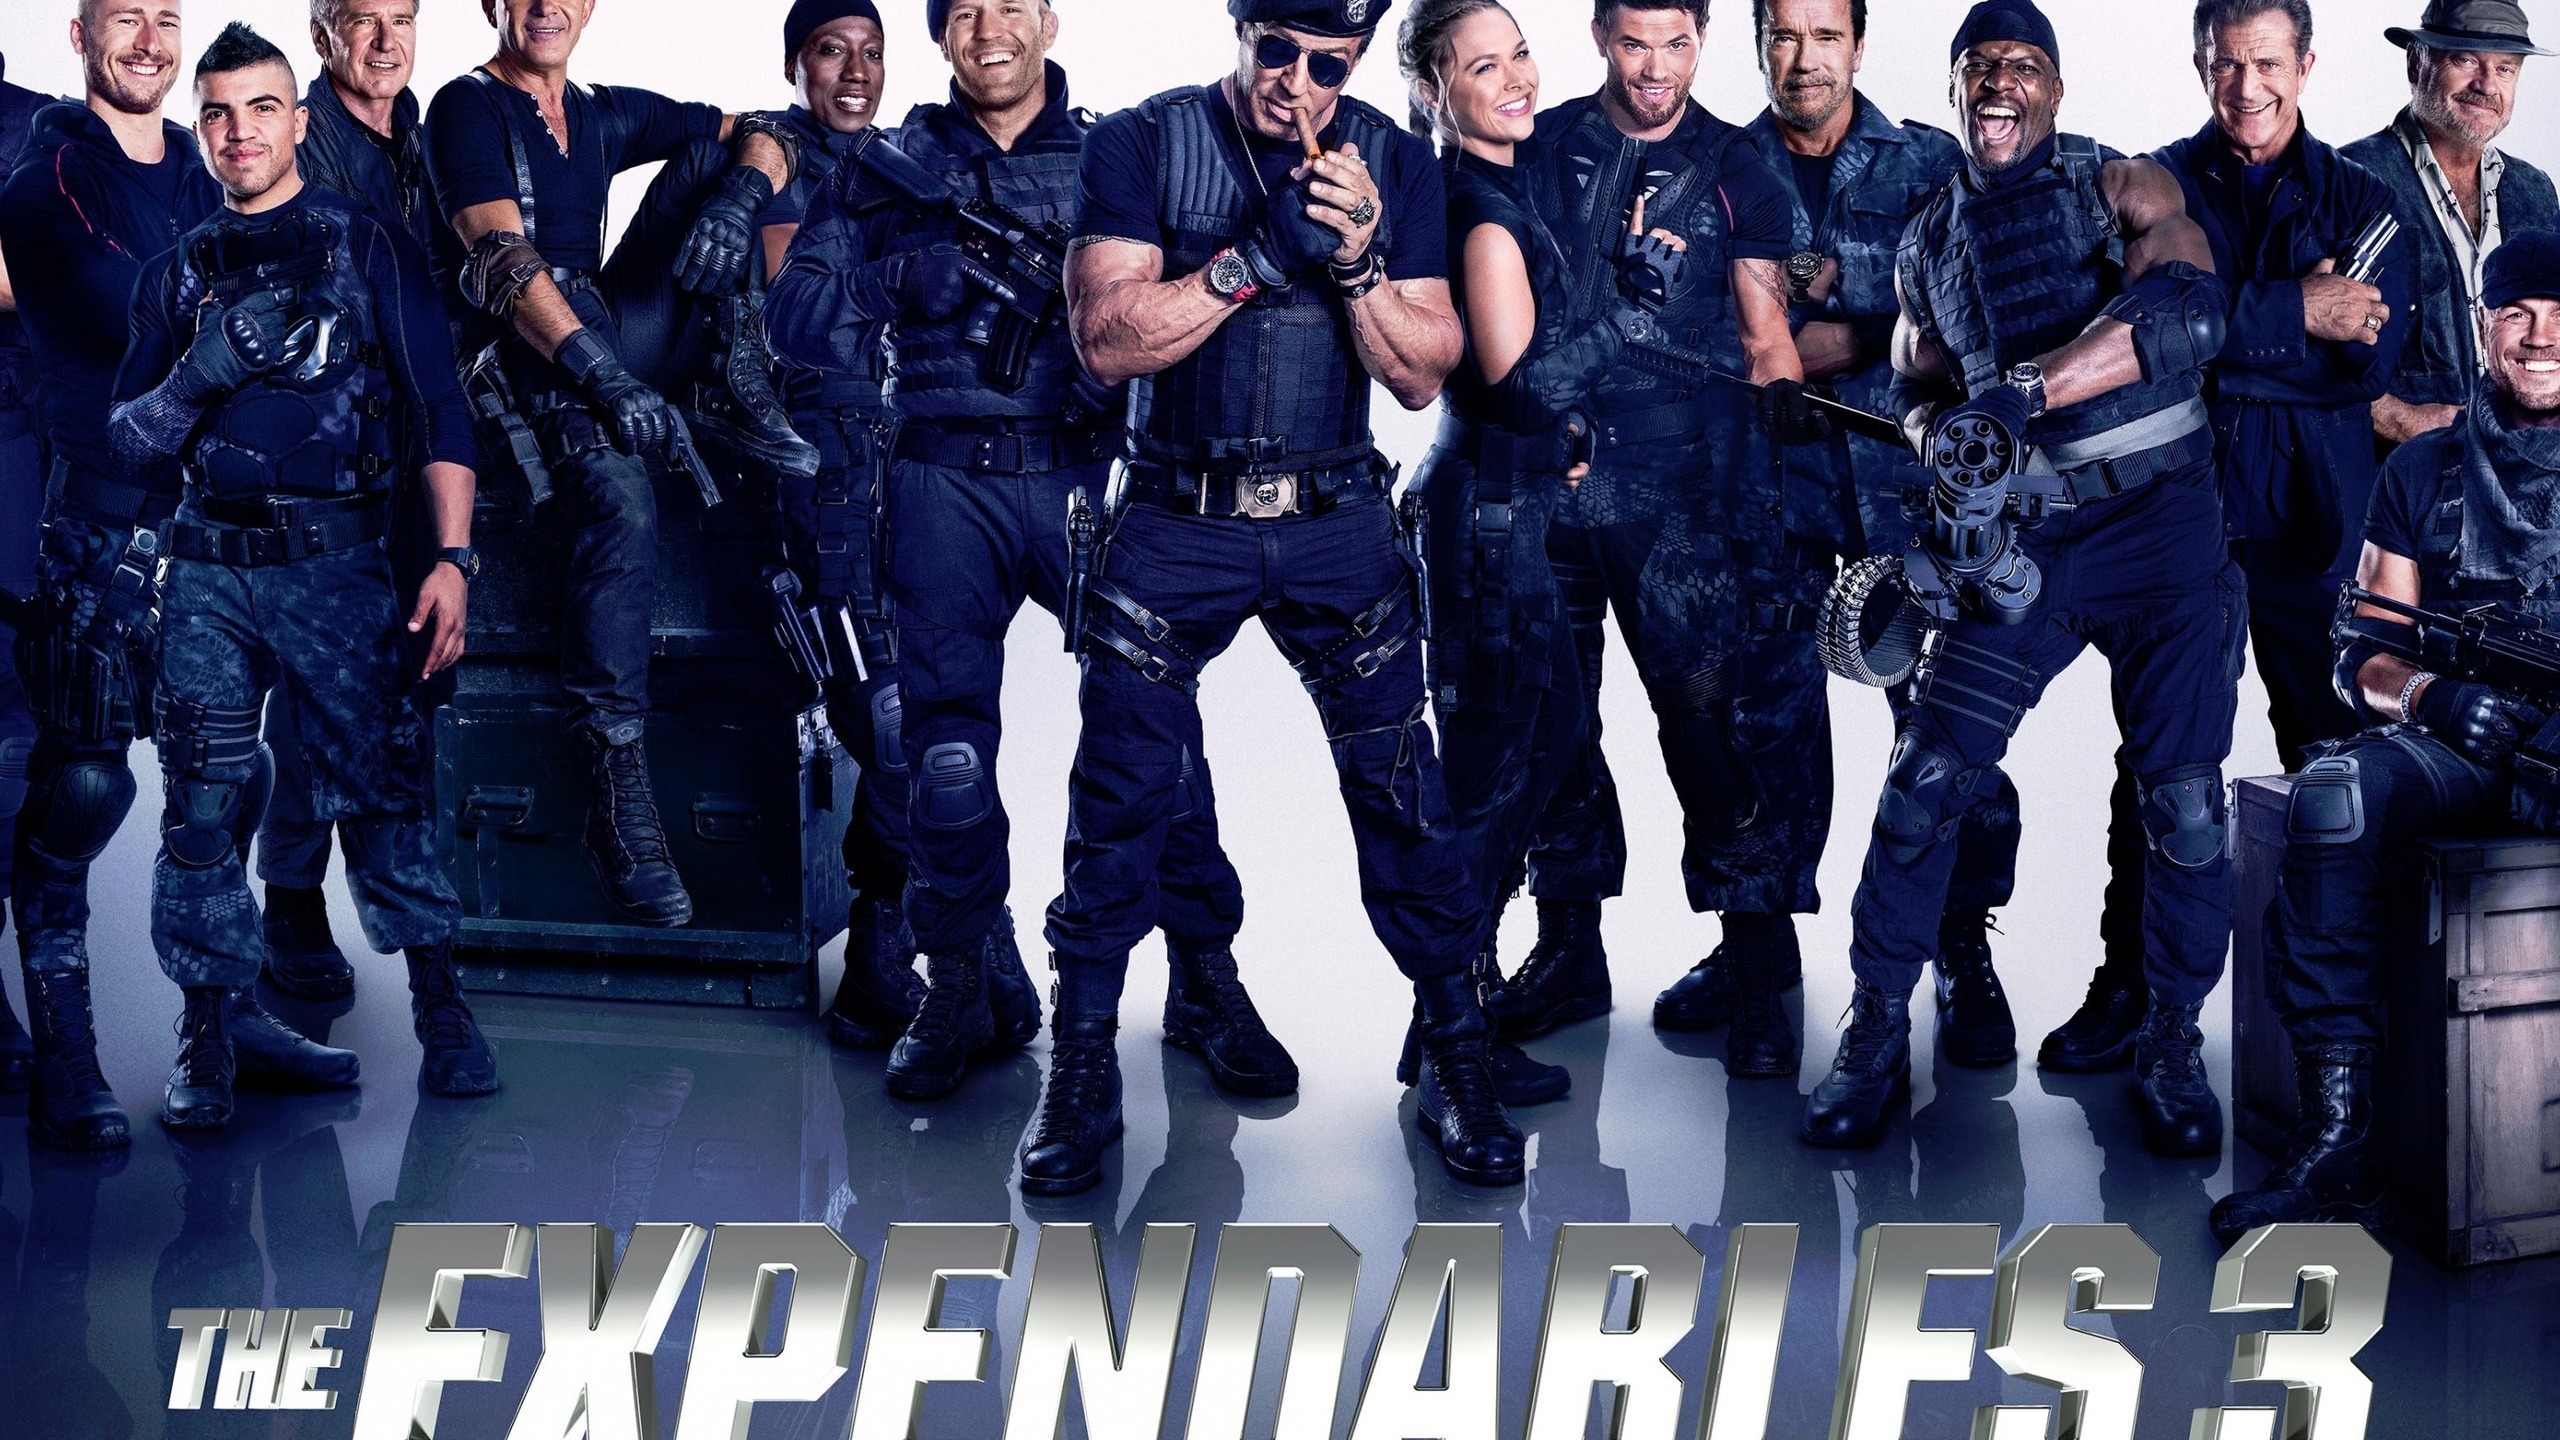 The Expendables 3 Poster for 2560x1440 HDTV resolution